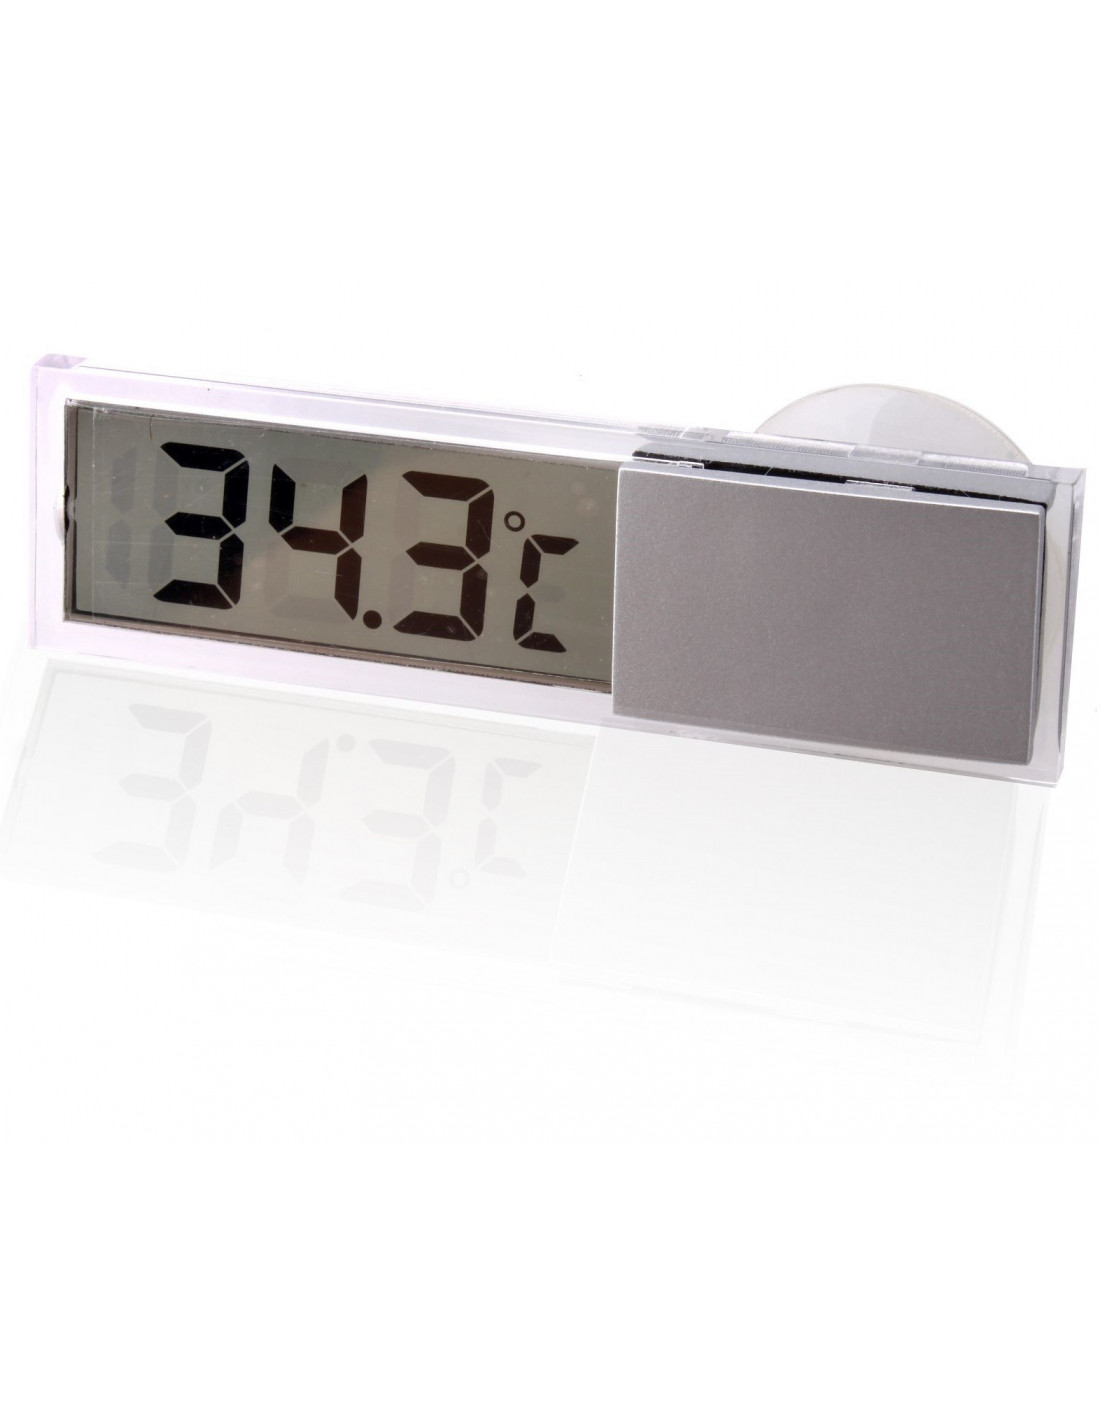 Transparent digital thermometer with suction cup